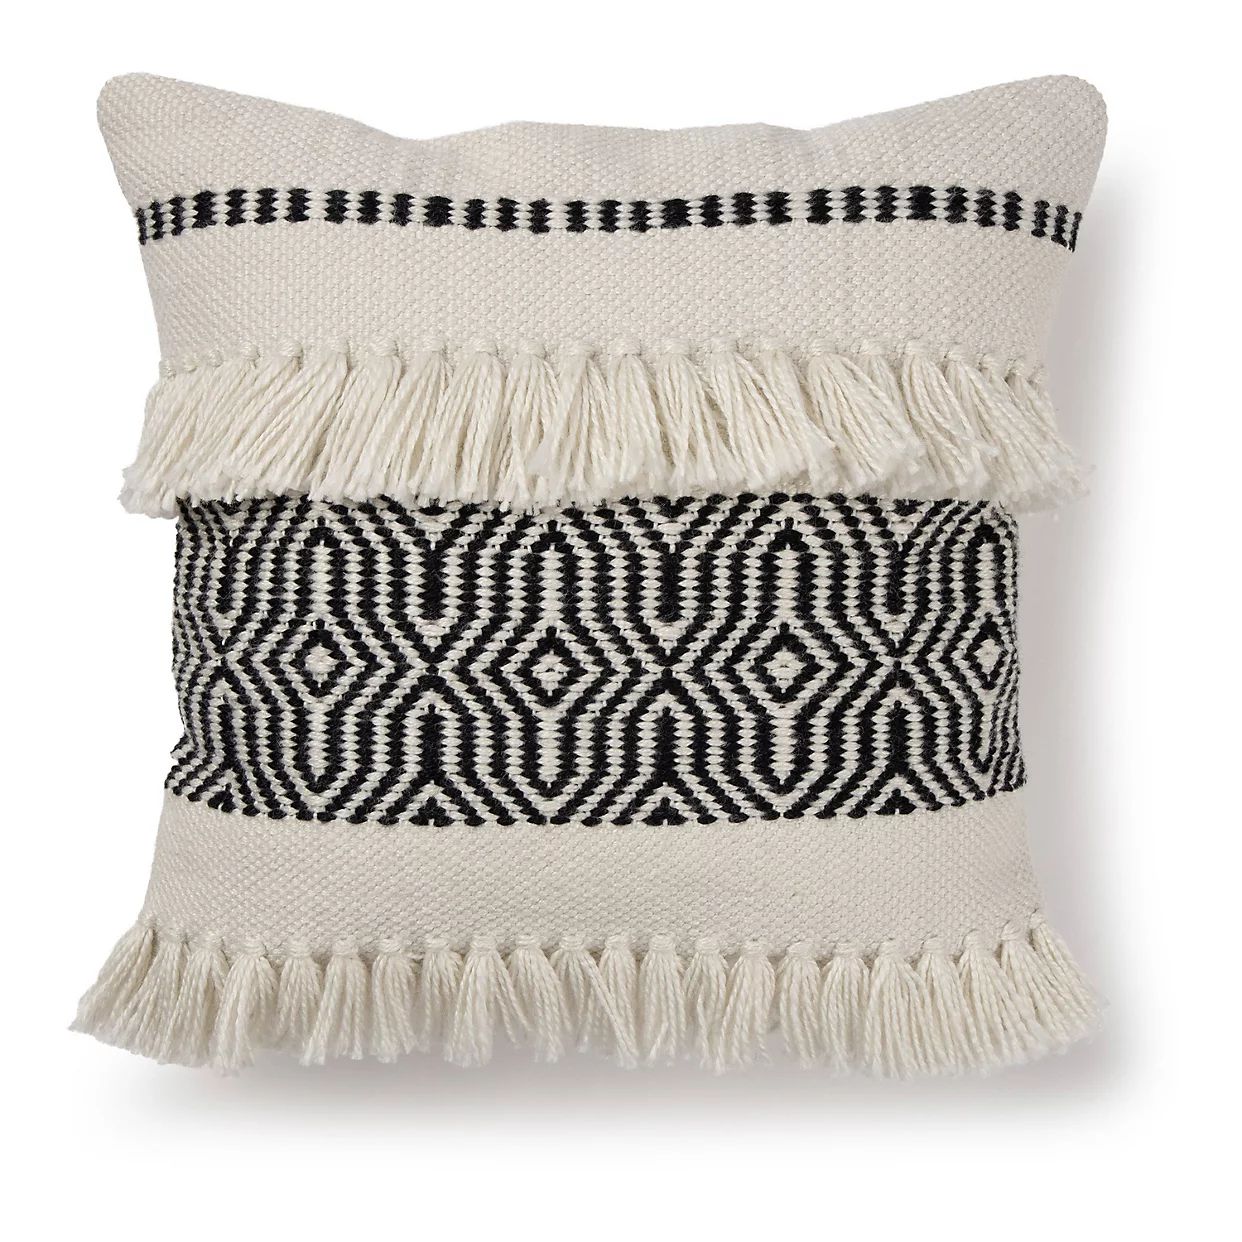 Sonoma Goods For Life® Indoor/Outdoor Throw Pillow | Kohl's